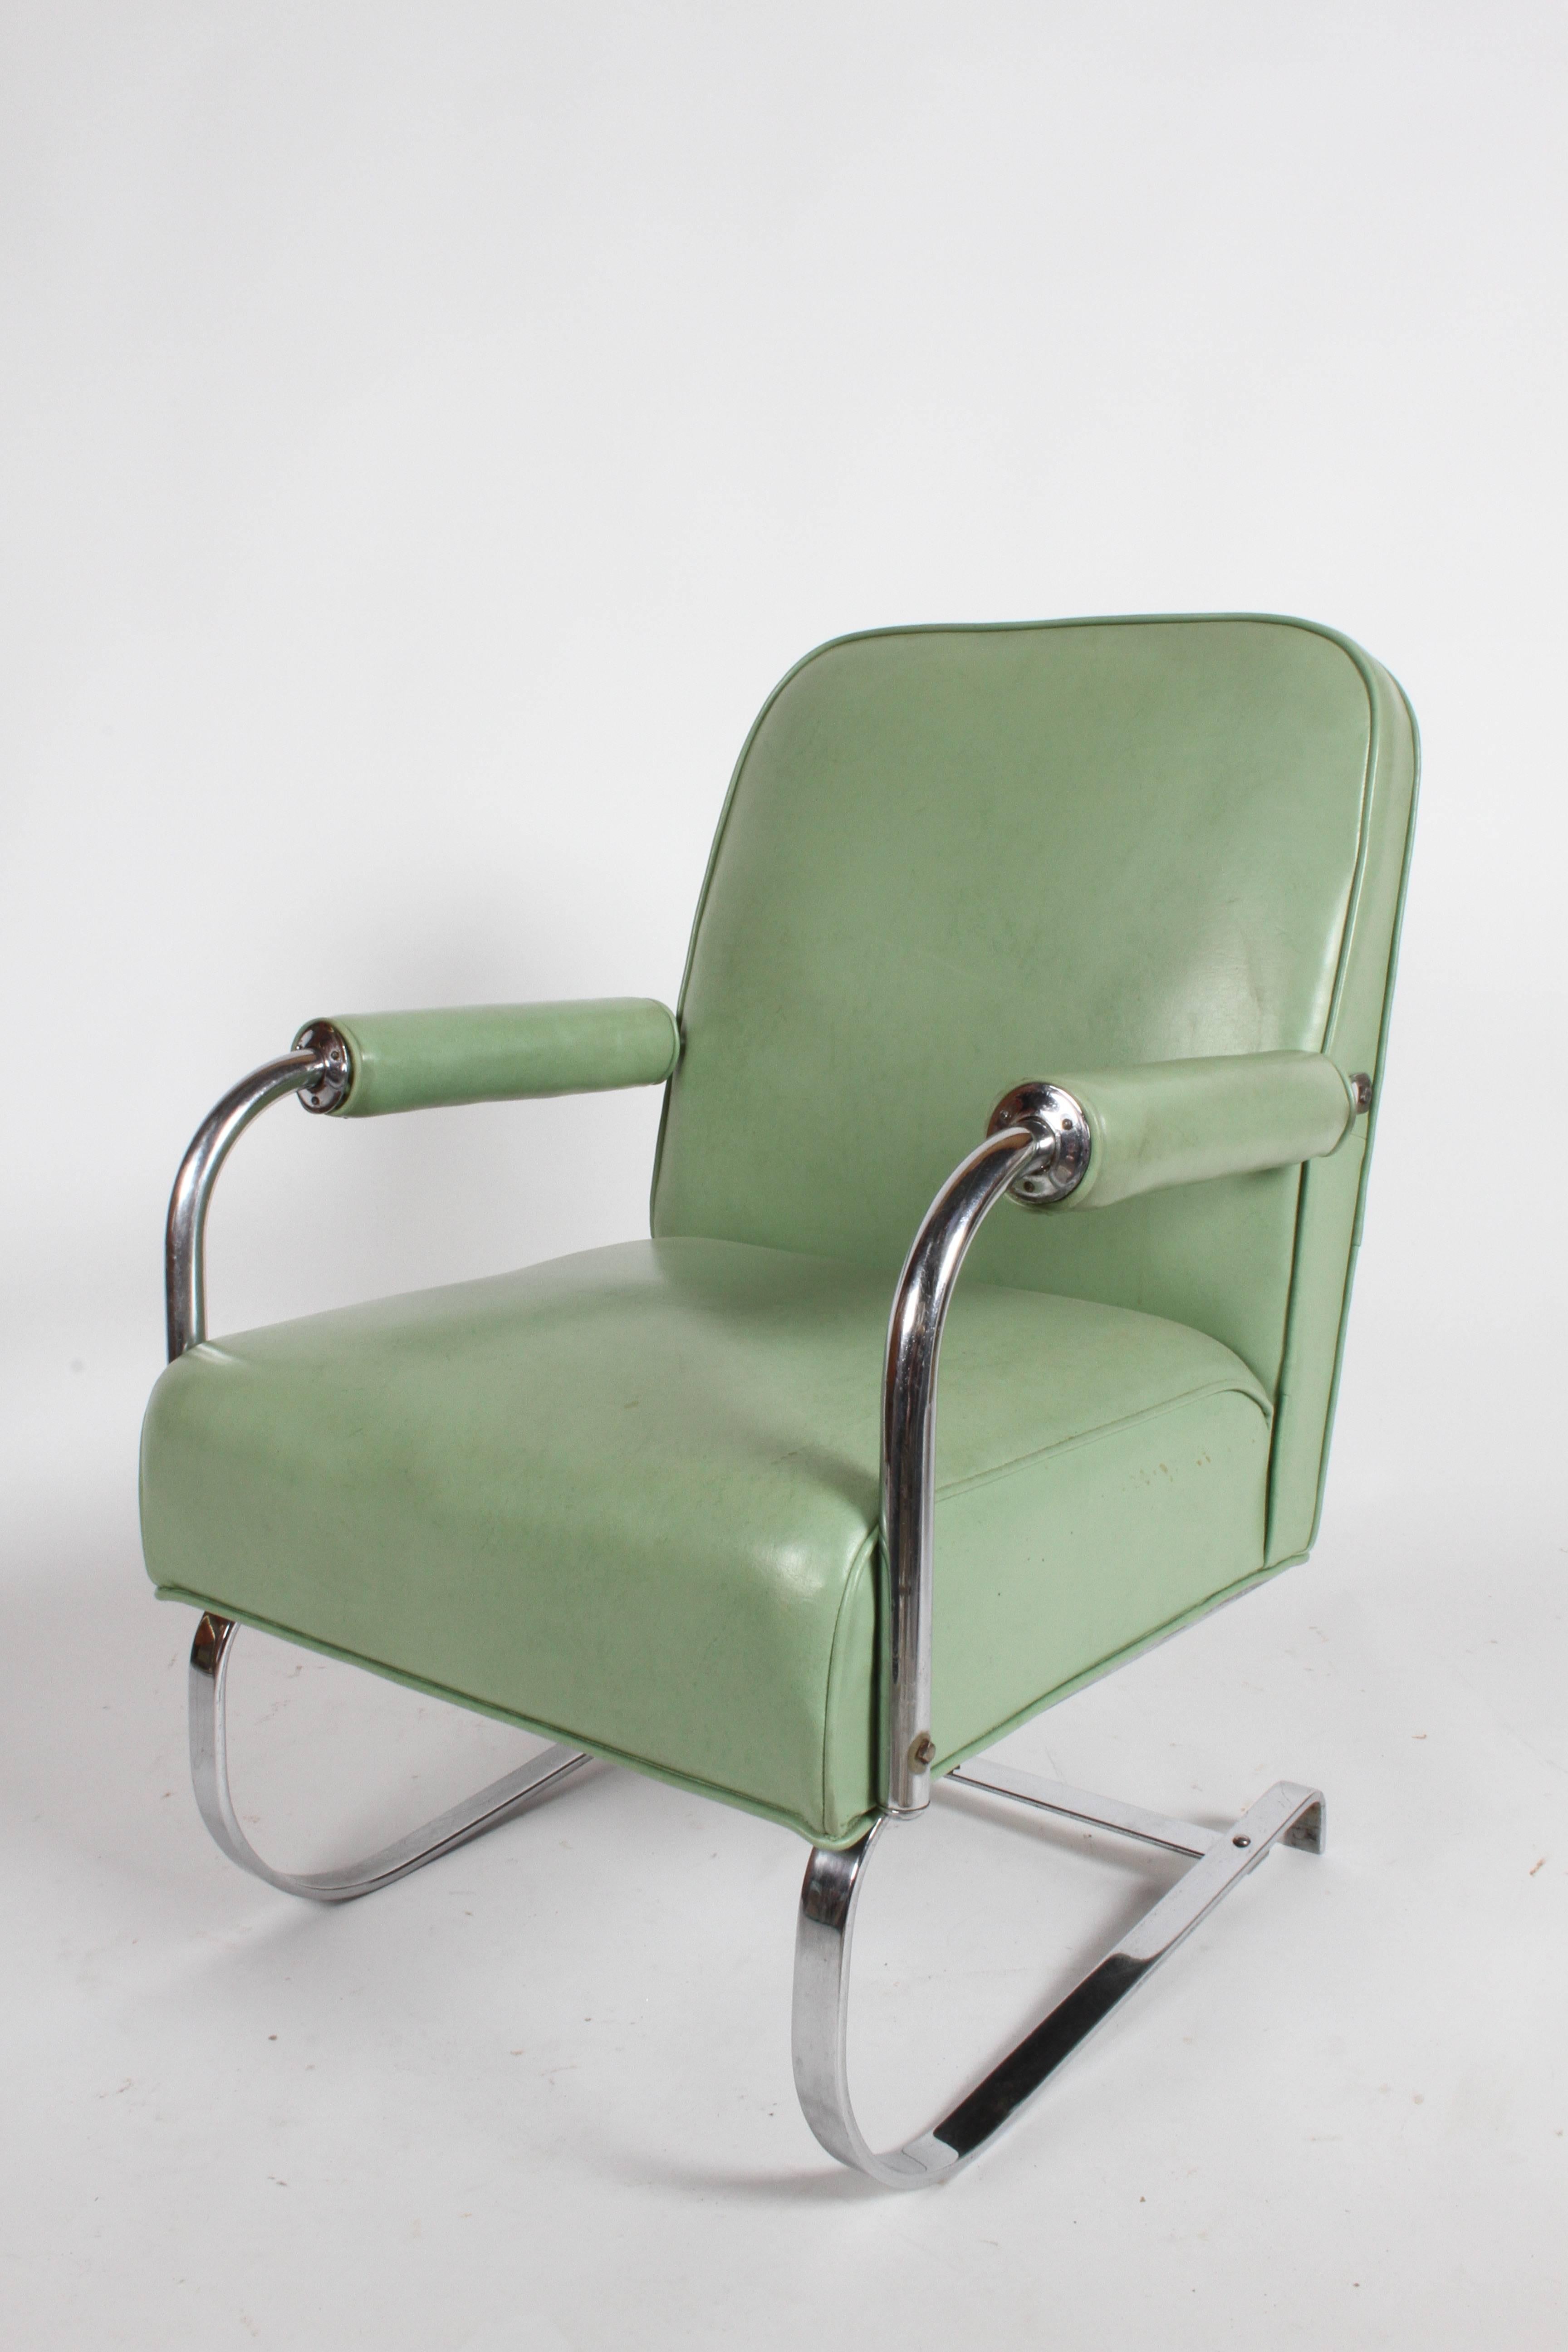 Vintage KEM Weber for Lloyd Art Deco springer lounge chair. Has been reupholstered a while ago, should update if you want it perfect. Original chrome plate, label. Measures: Seat 17.5